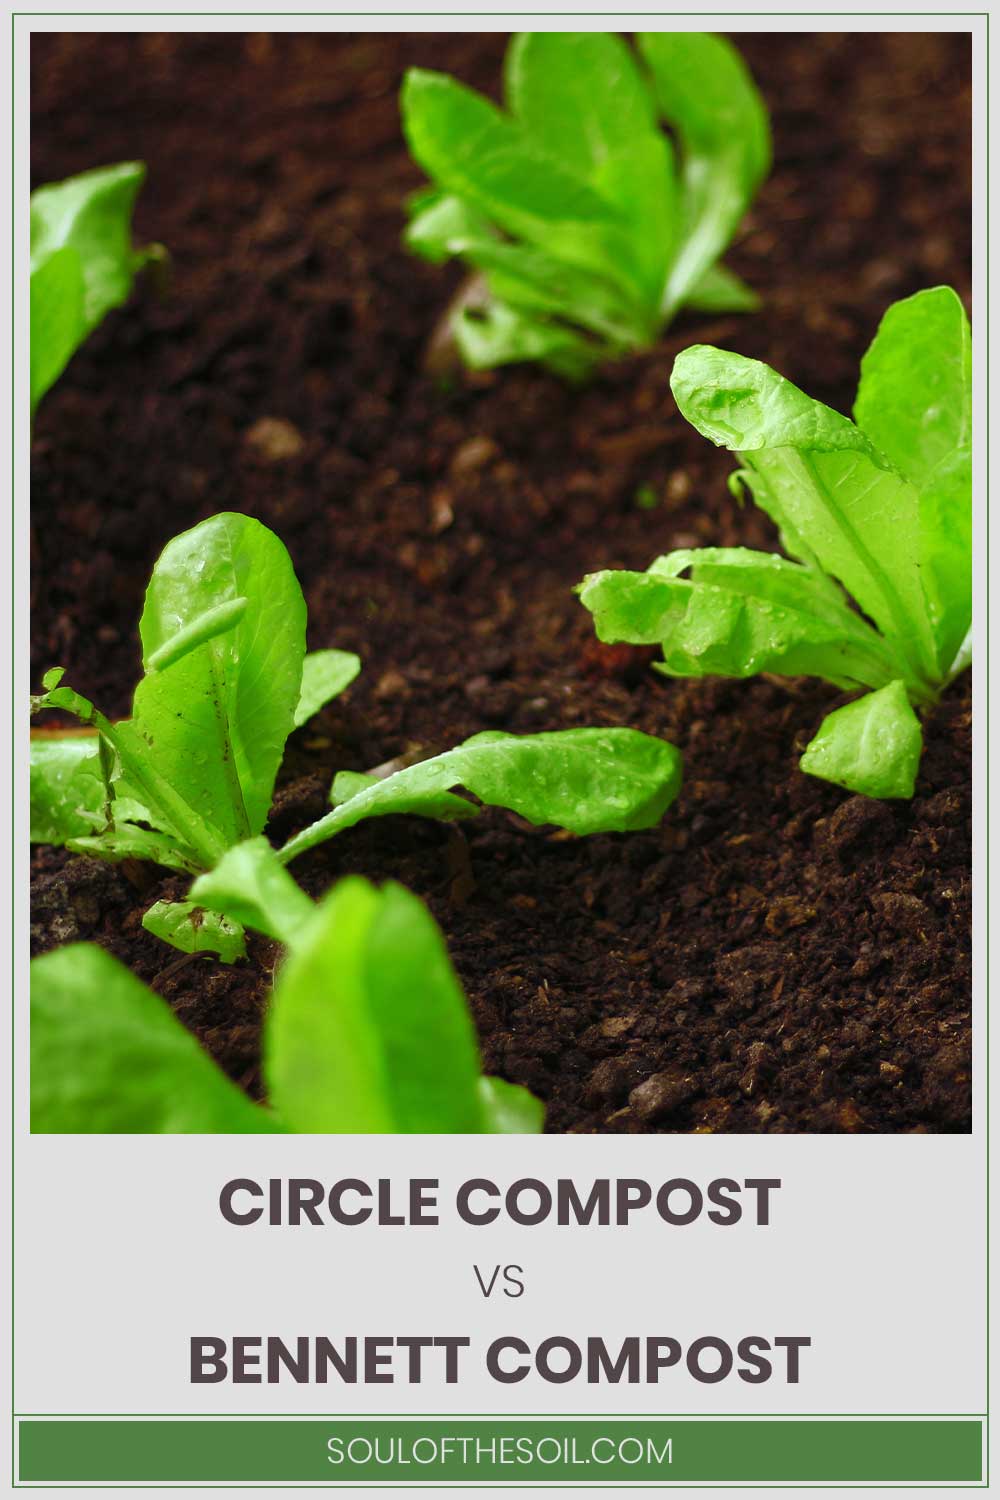 Newly grown small plans on compost - Circle Compost vs. Bennett Compost.